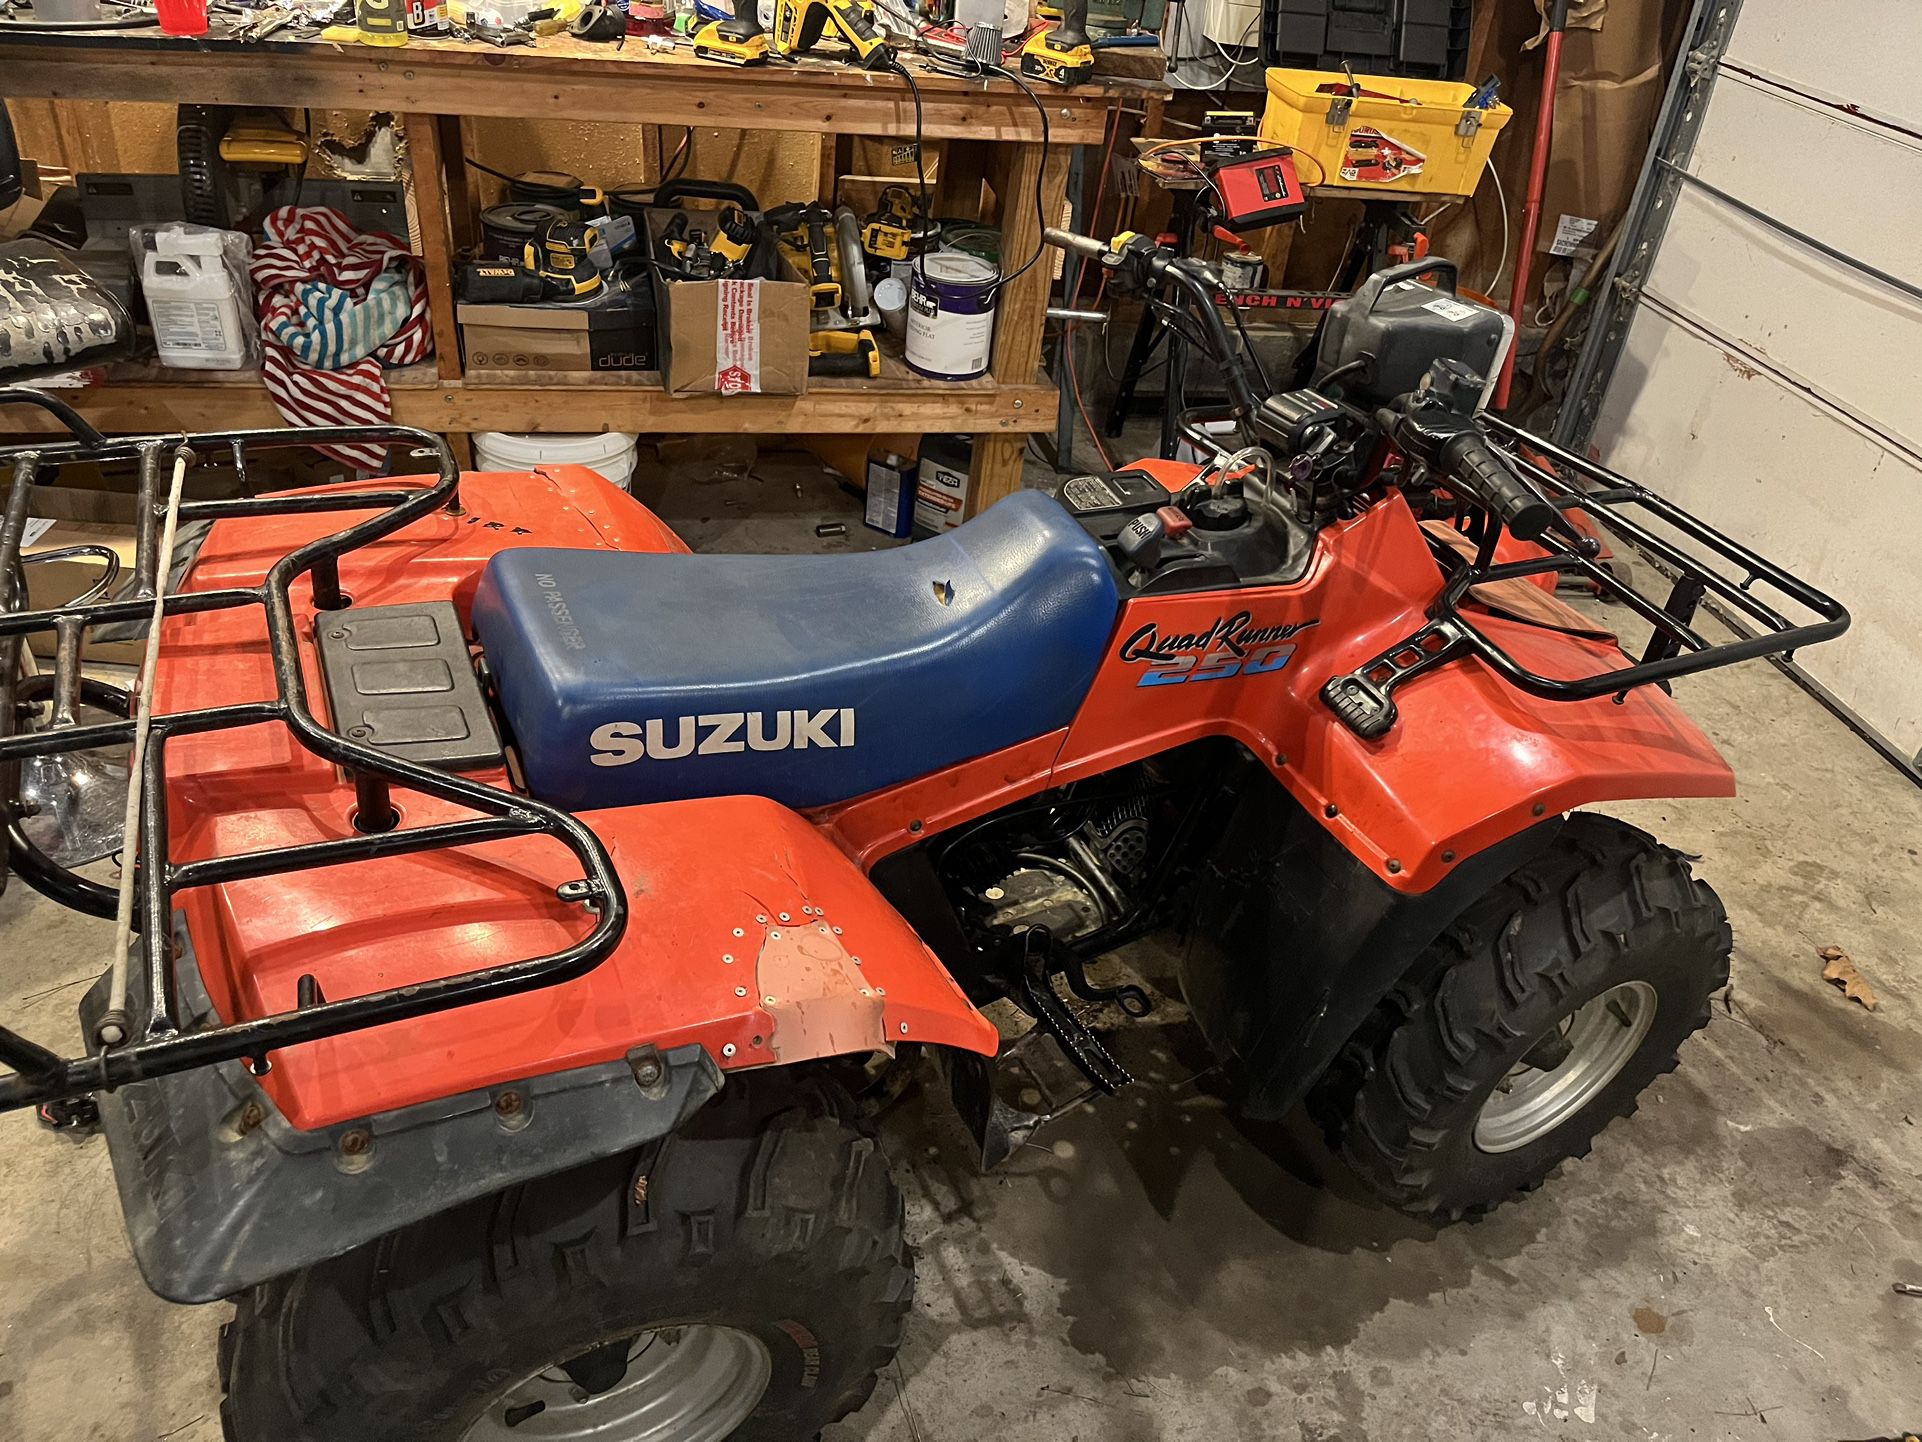 198? Suzuki 250 quad Runner five speed with reverse low high gear, semi automatic transmission.